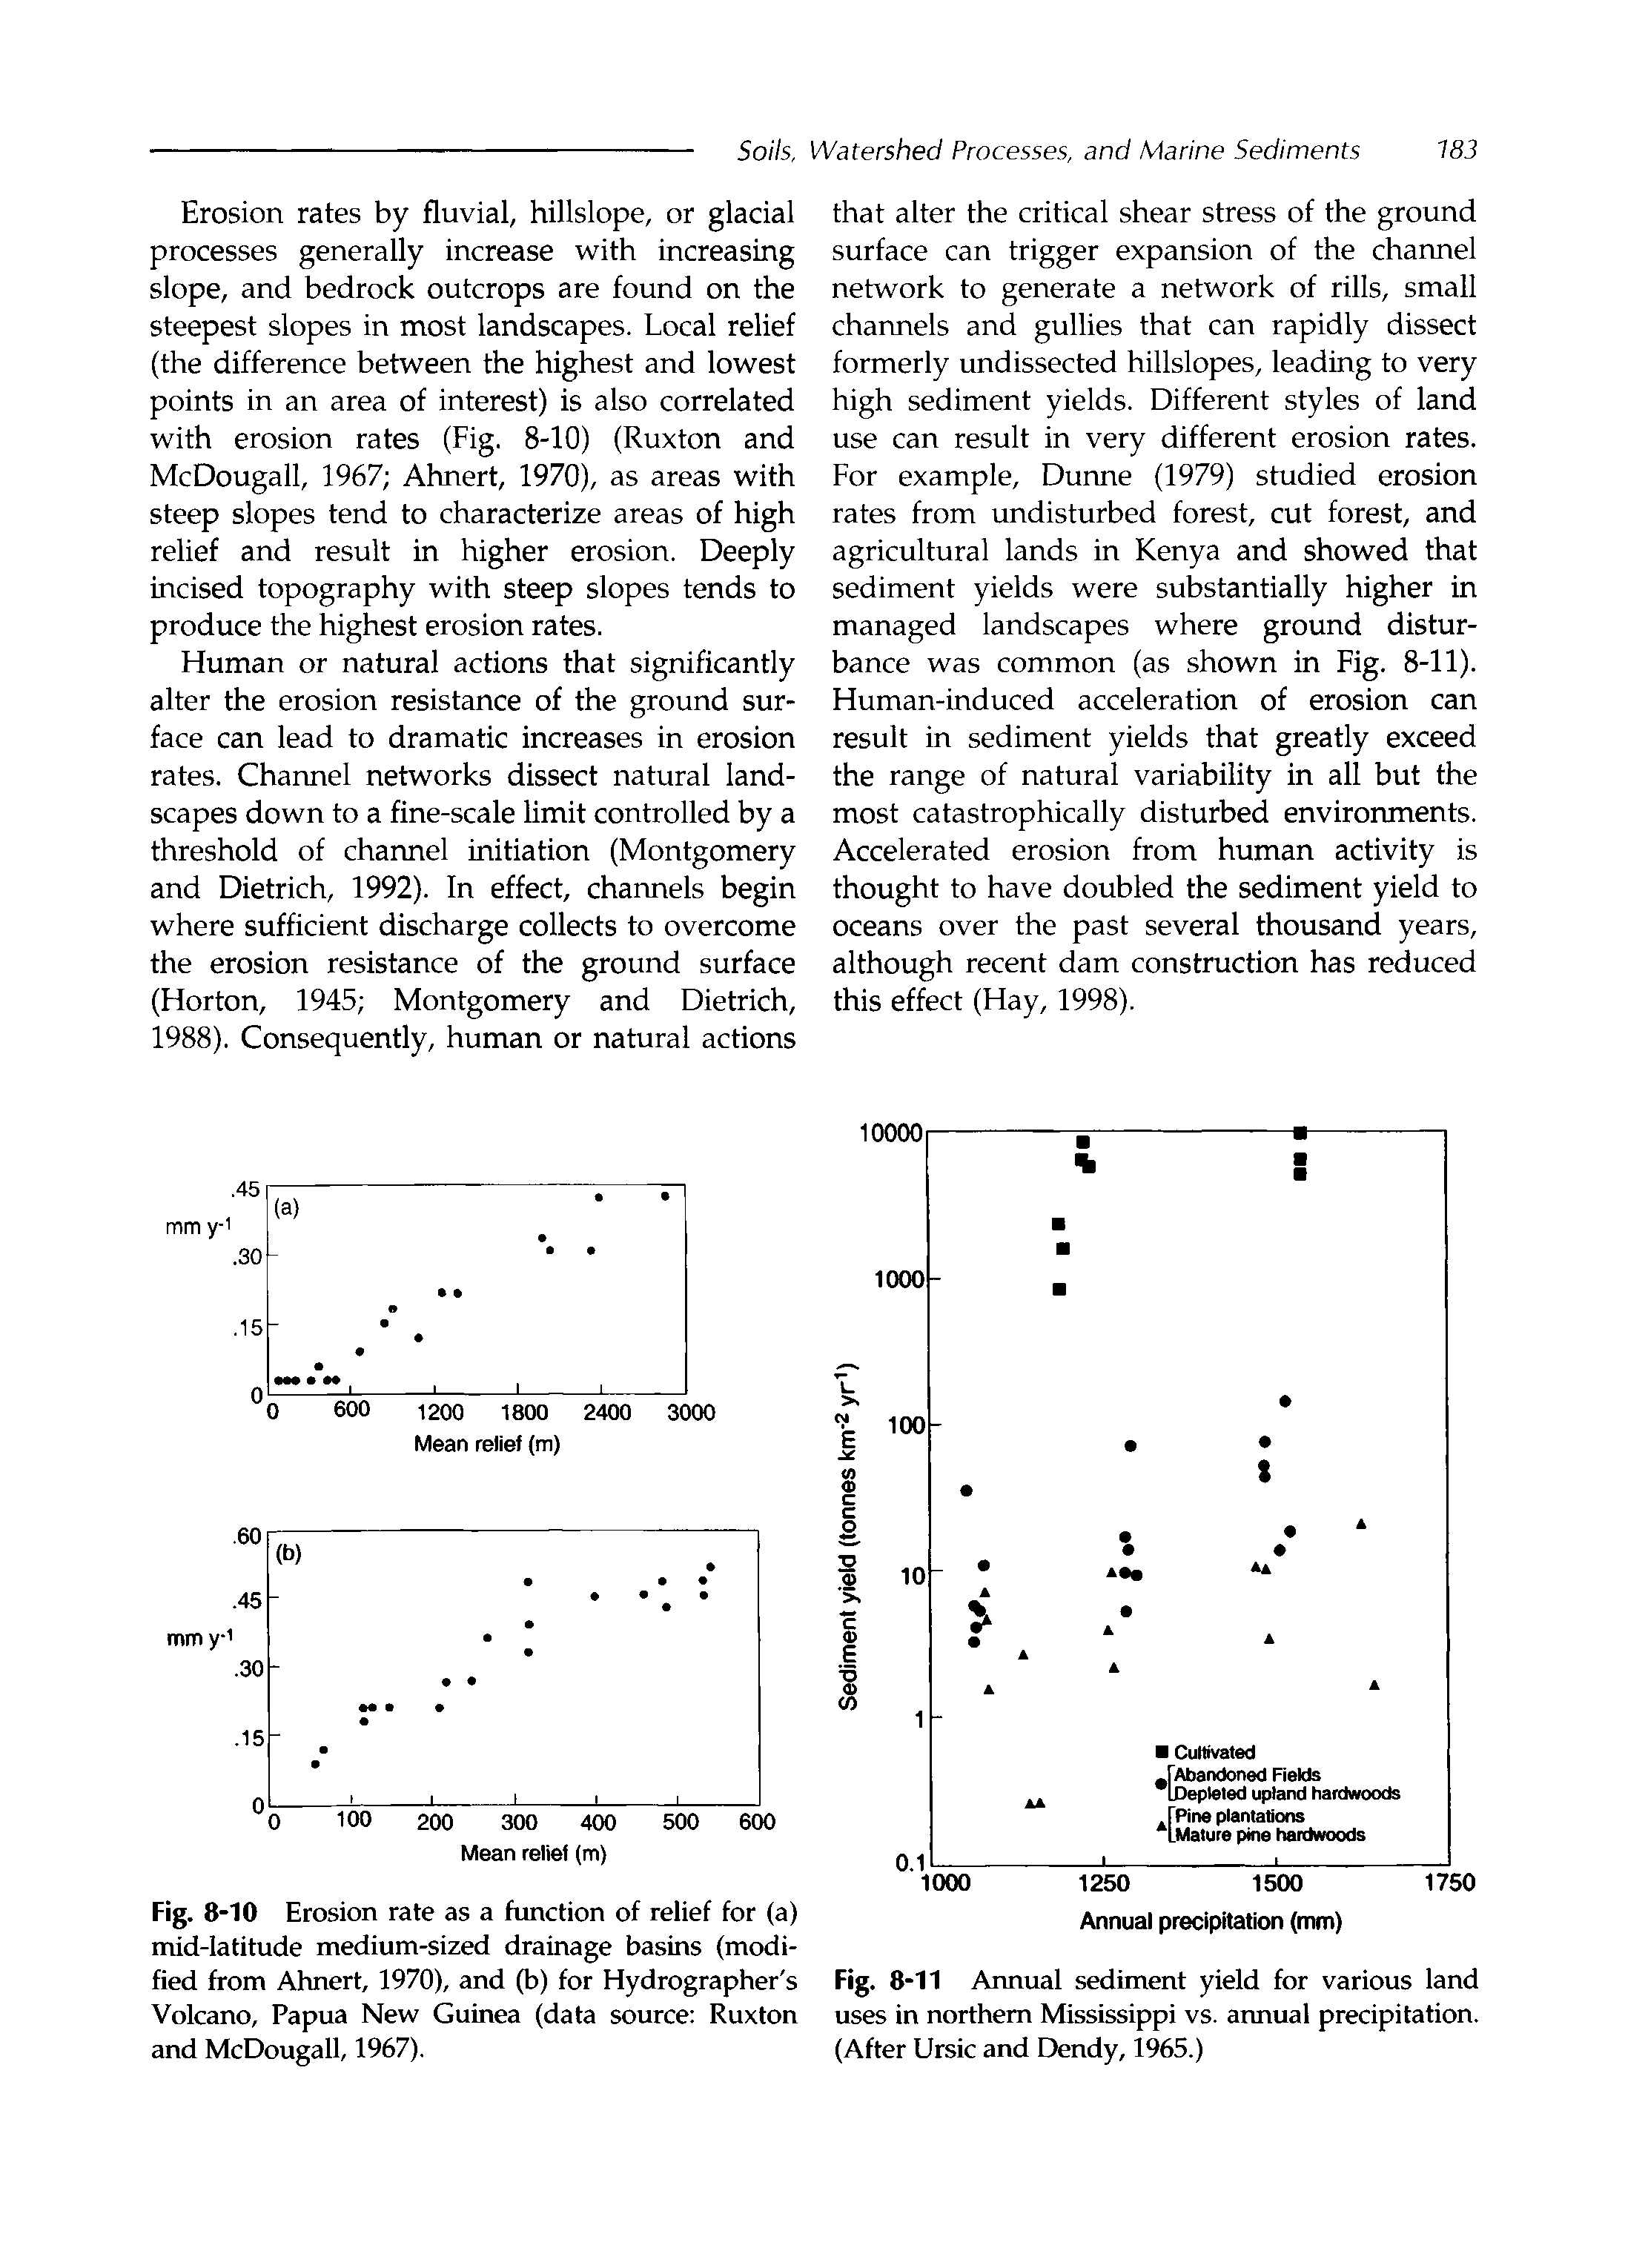 Fig. 8-10 Erosion rate as a function of relief for (a) mid-latitude medium-sized drainage basins (modified from Ahnert, 1970), and (b) for Hydrographer s Volcano, Papua New Guinea (data source Ruxton and McDougall, 1967).